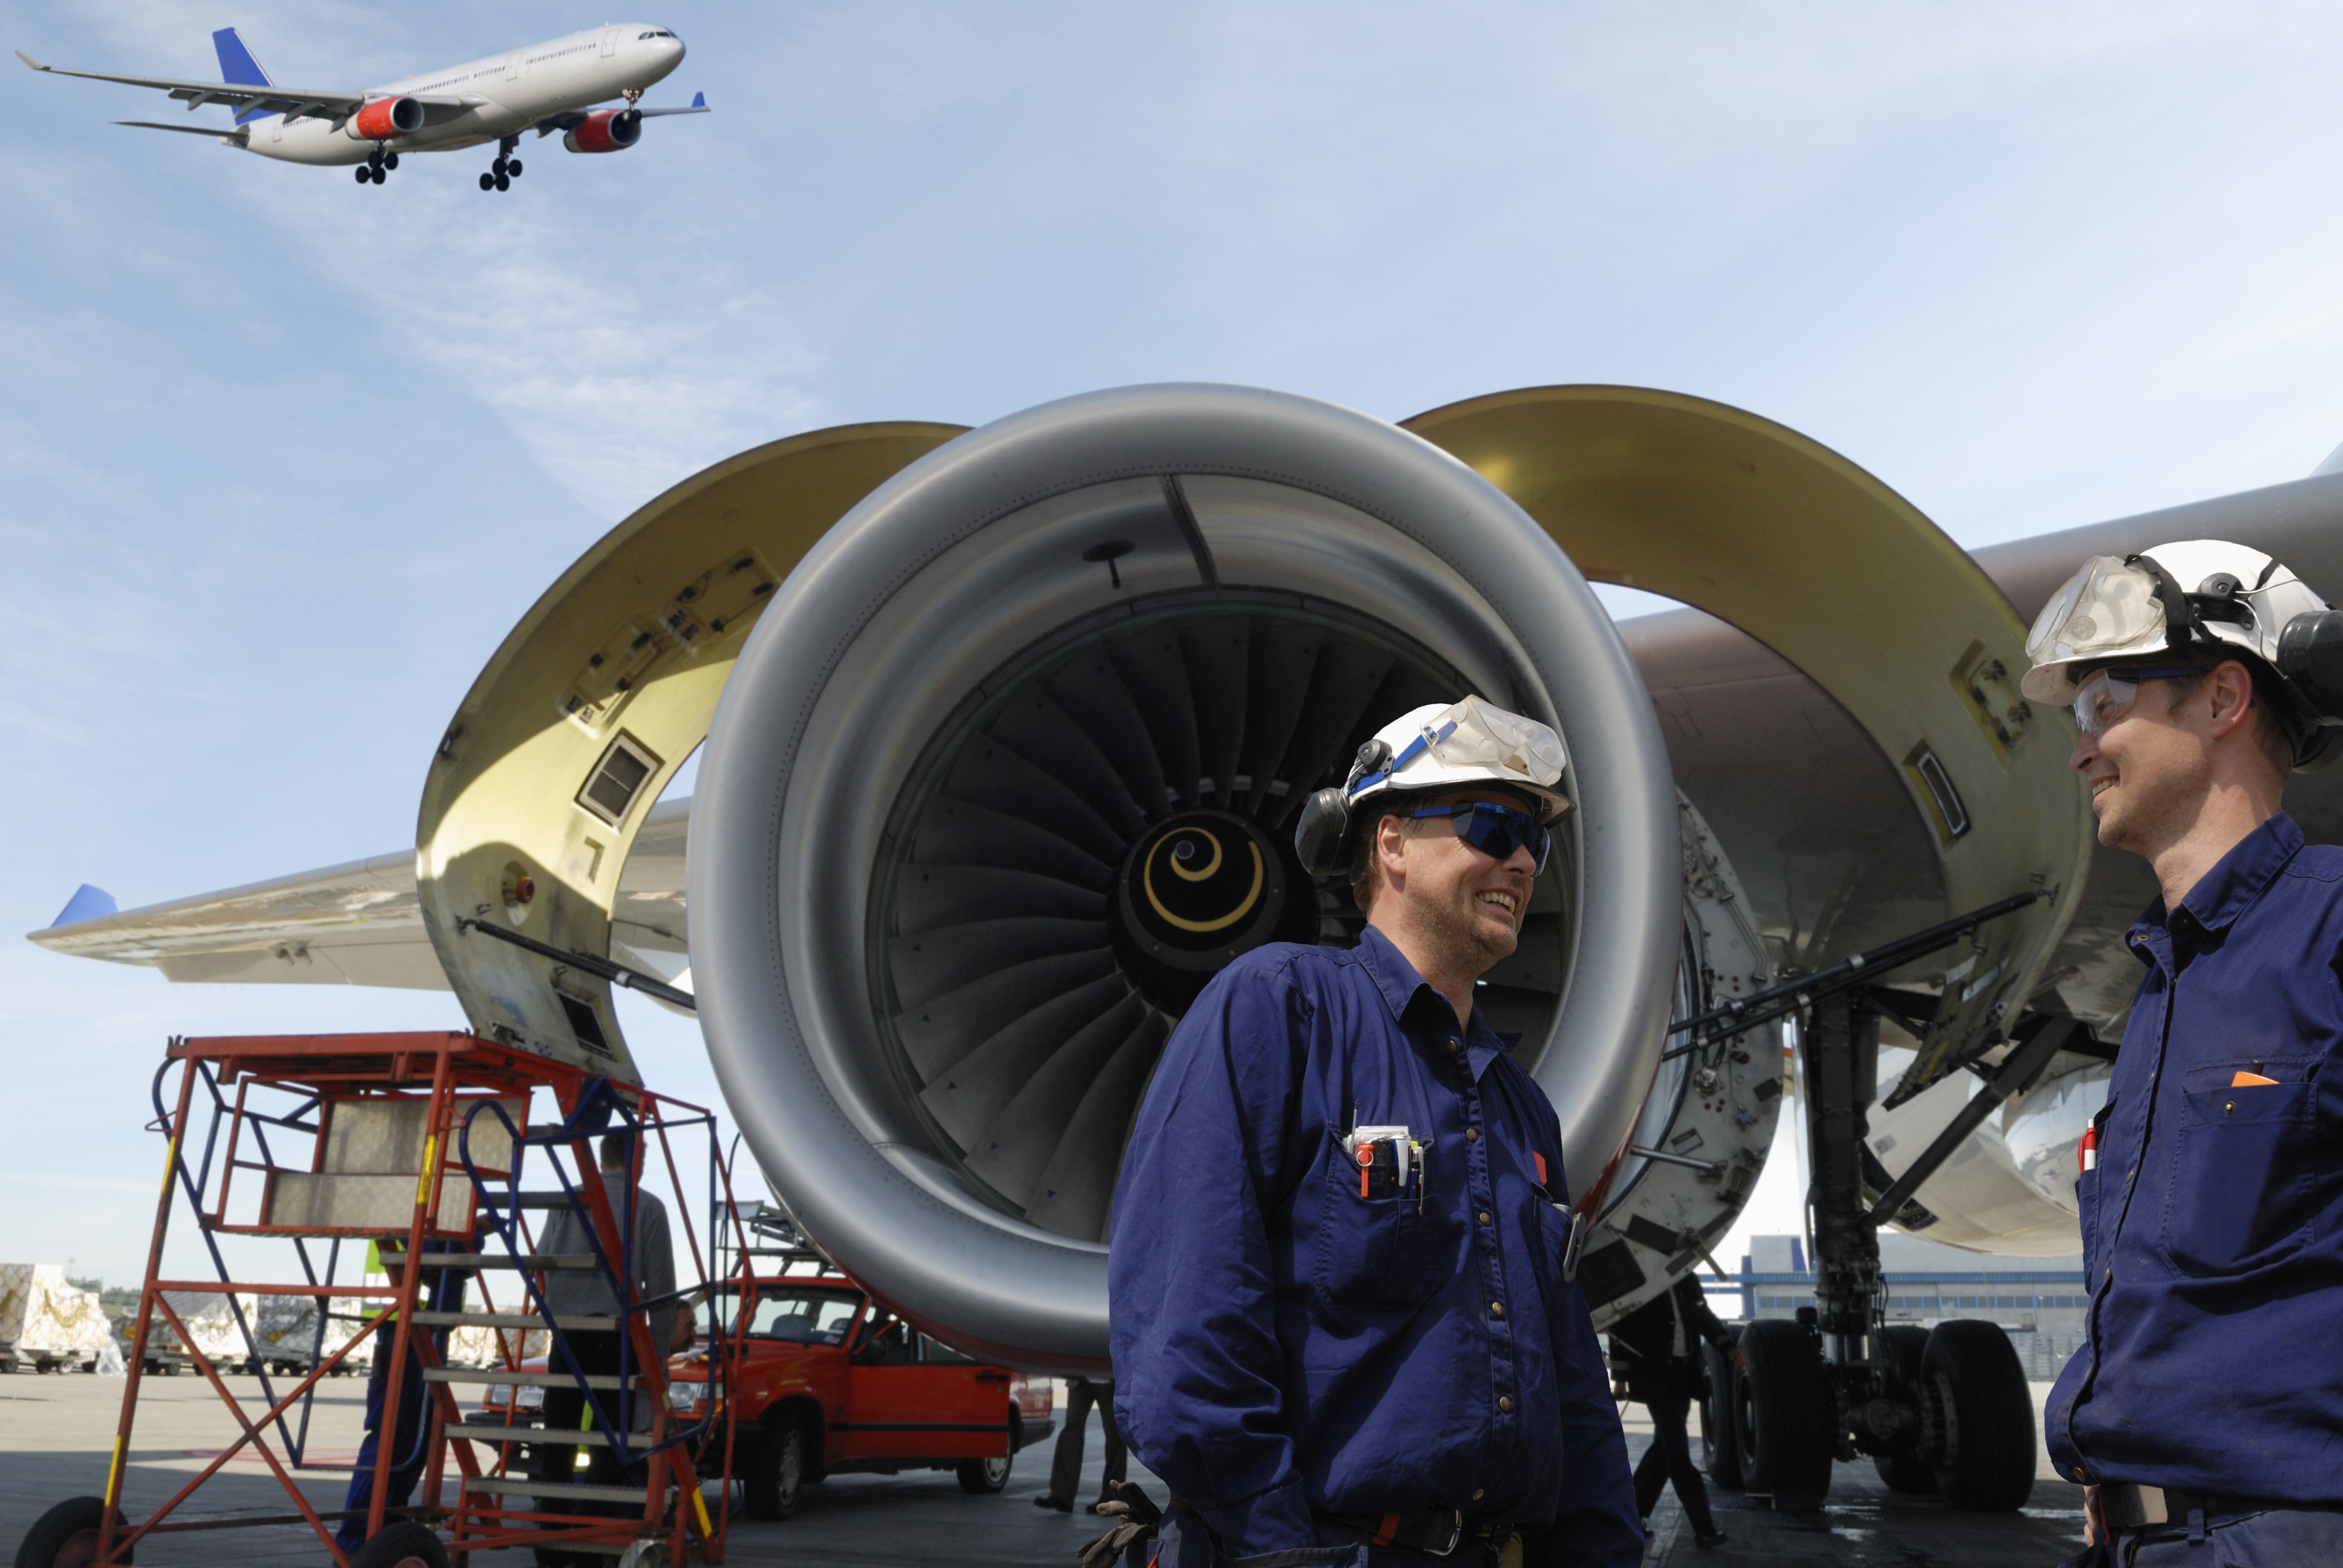 Predictive maintenance can help keep planes in the air safely